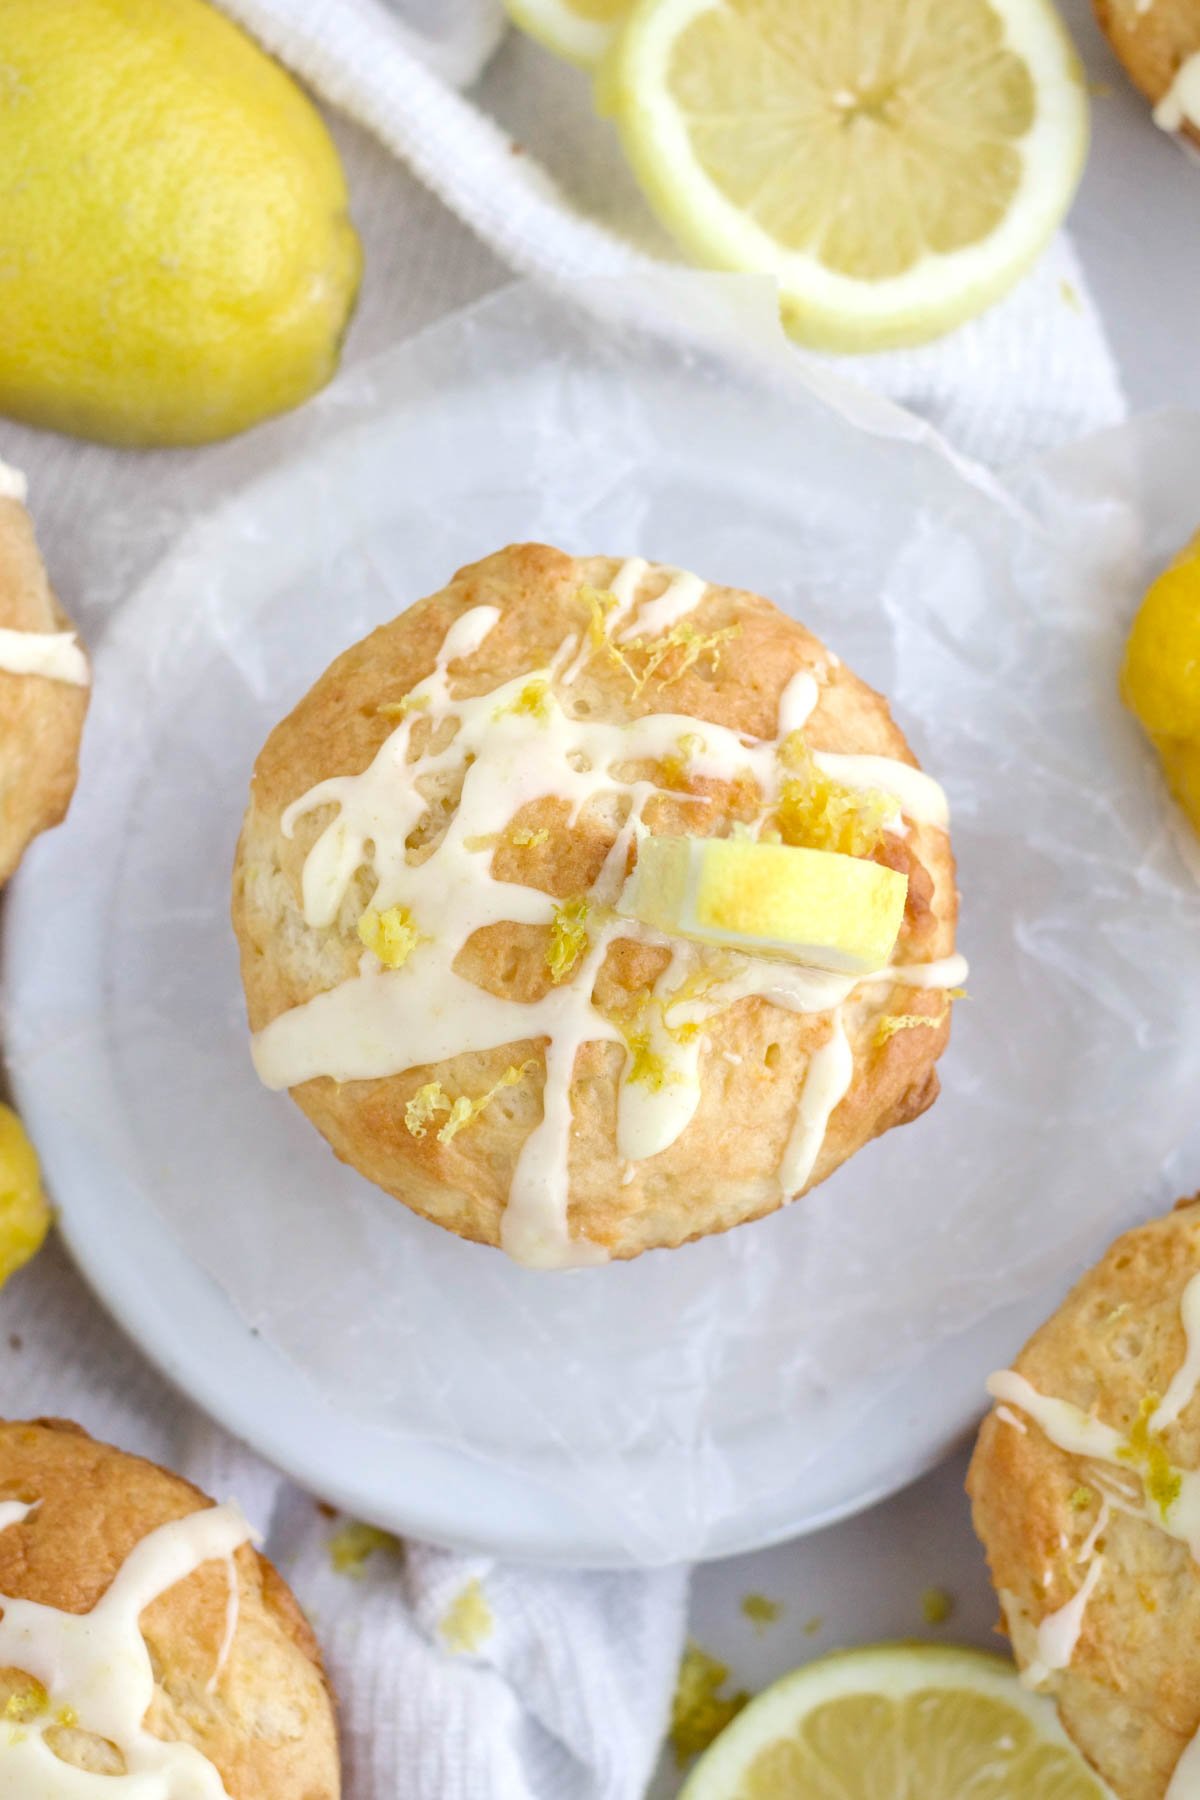 Sugary glaze is strewn atop this Lemon Muffin brightened by flakes of flavorful lemon zest.